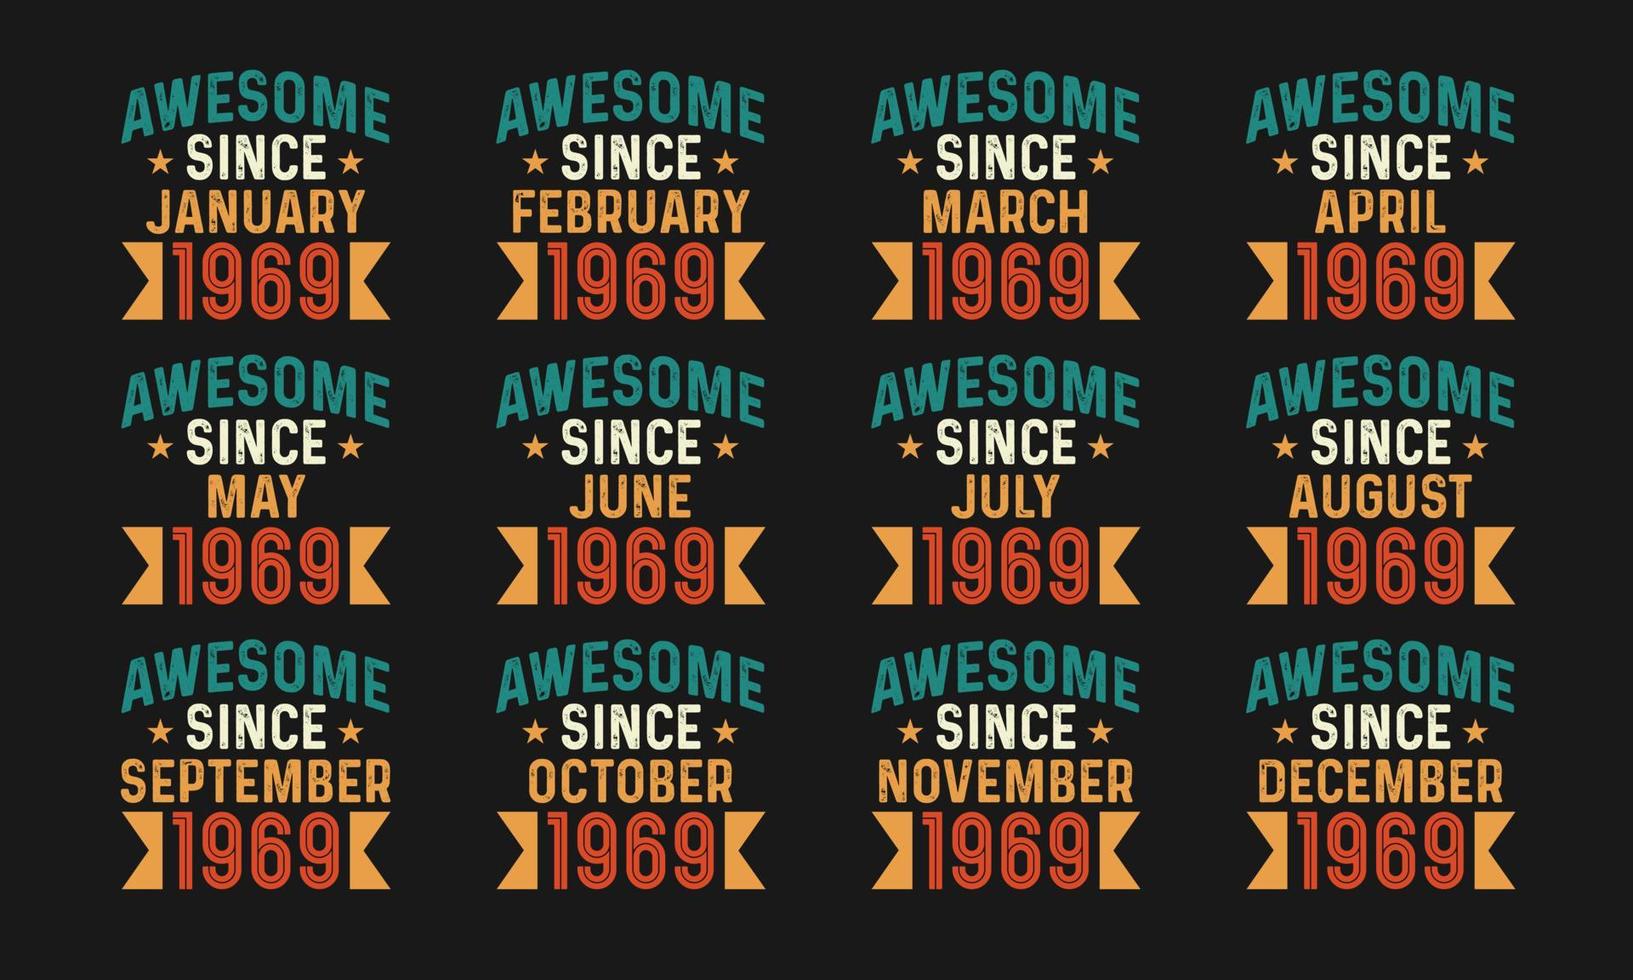 Awesome since January, February, March, April, May, June, July, August, September, October, November, and December 1969. Retro vintage all month in 1969 birthday celebration free download vector